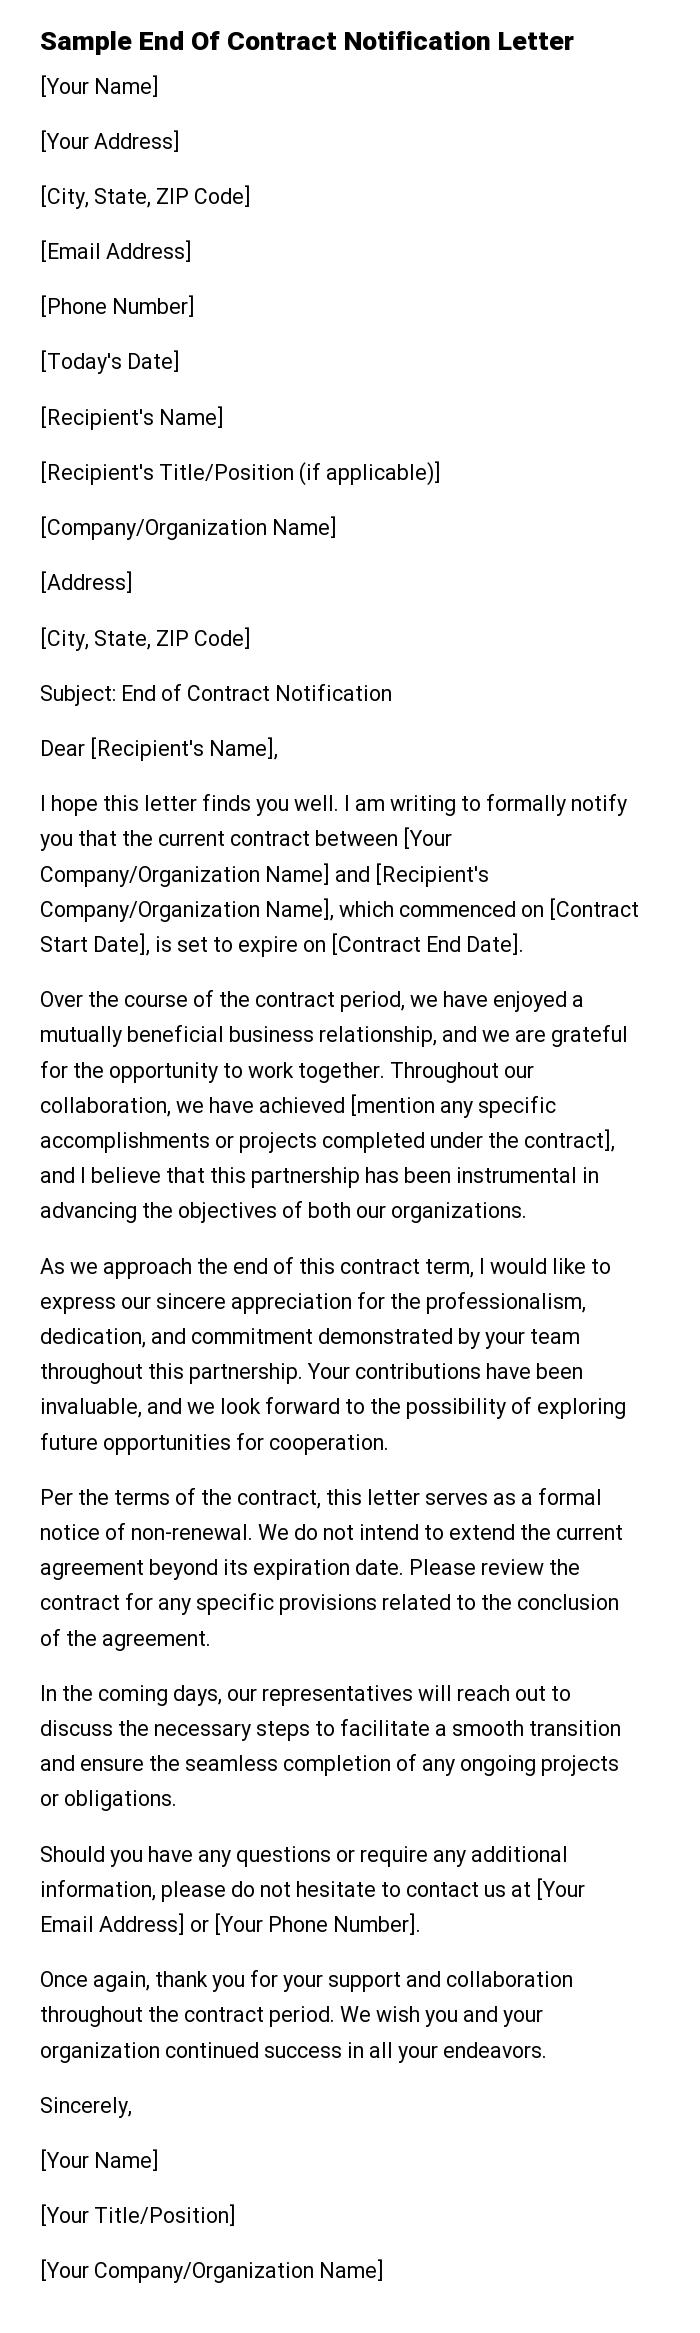 Sample End Of Contract Notification Letter